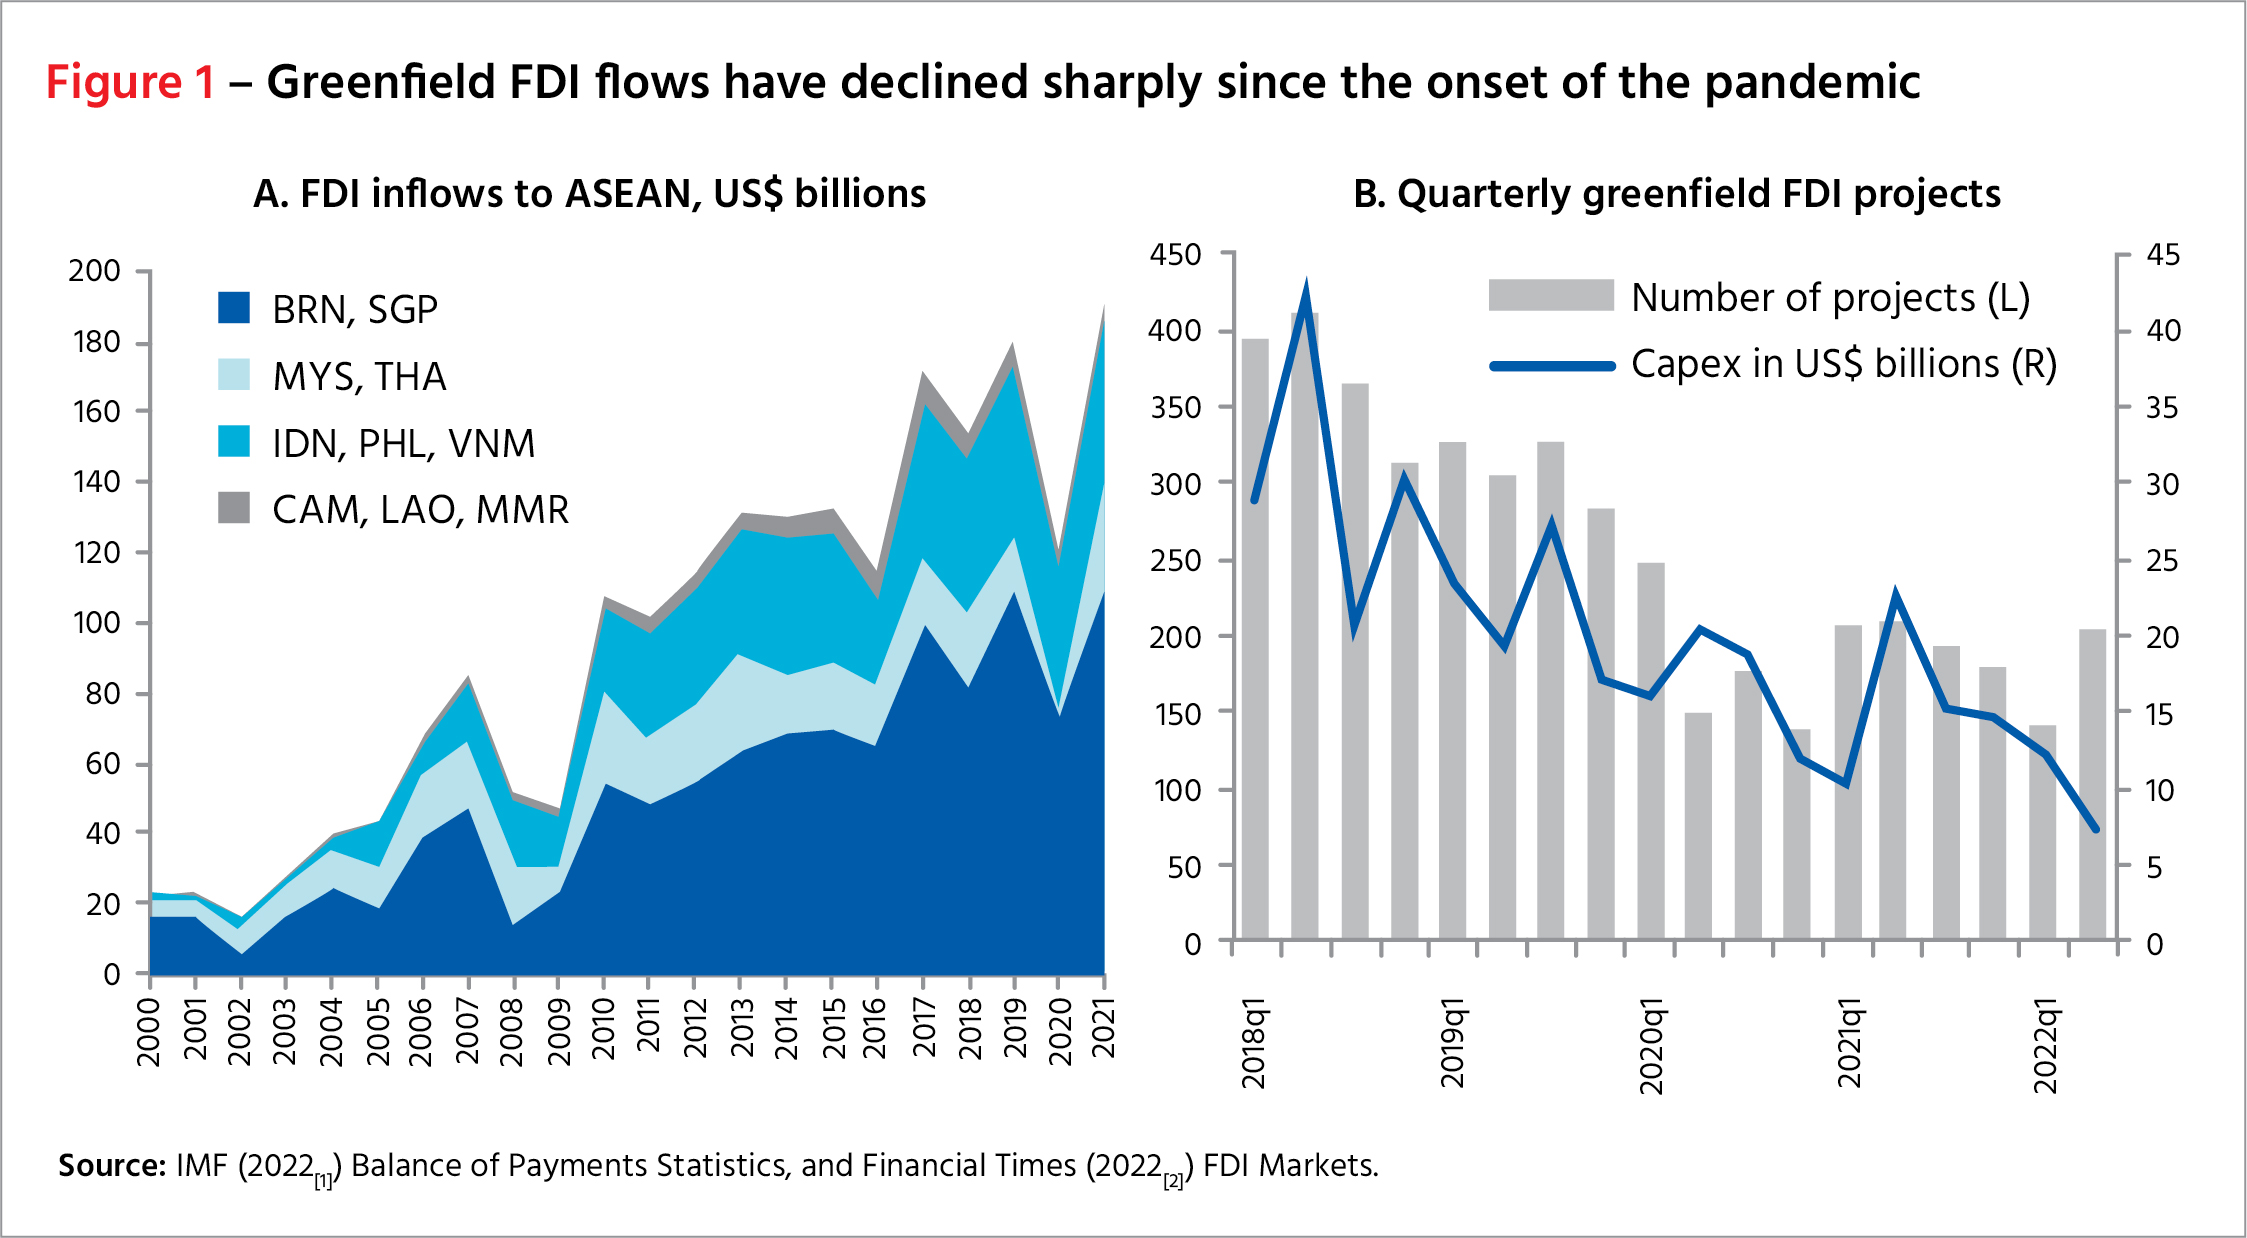 Greenfield FDI flows have declined sharply since the onset of the pandemic